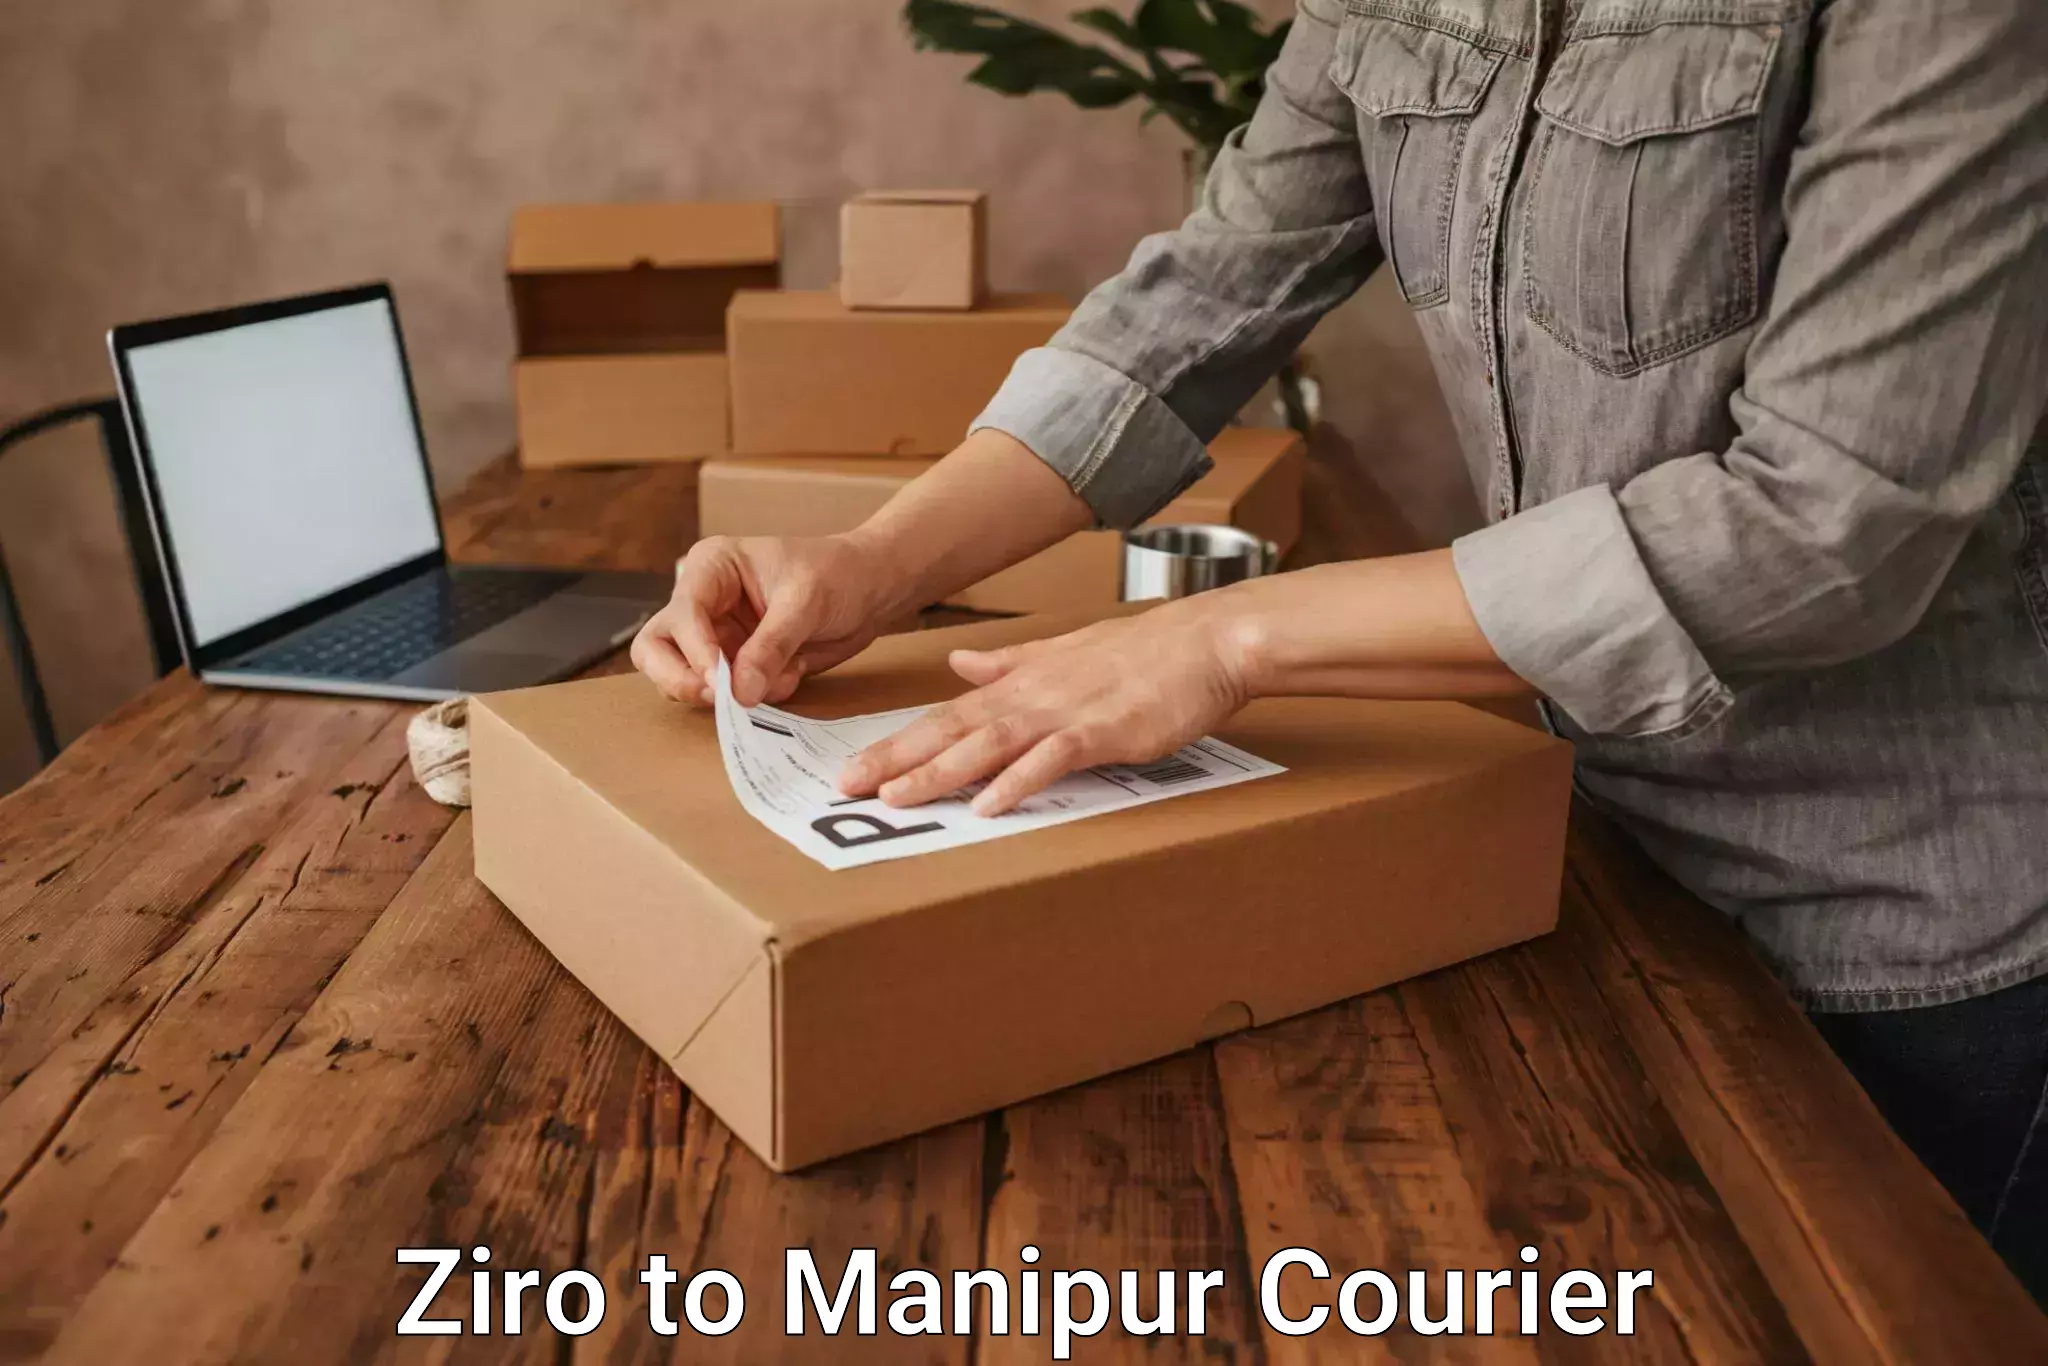 Courier service innovation Ziro to Manipur